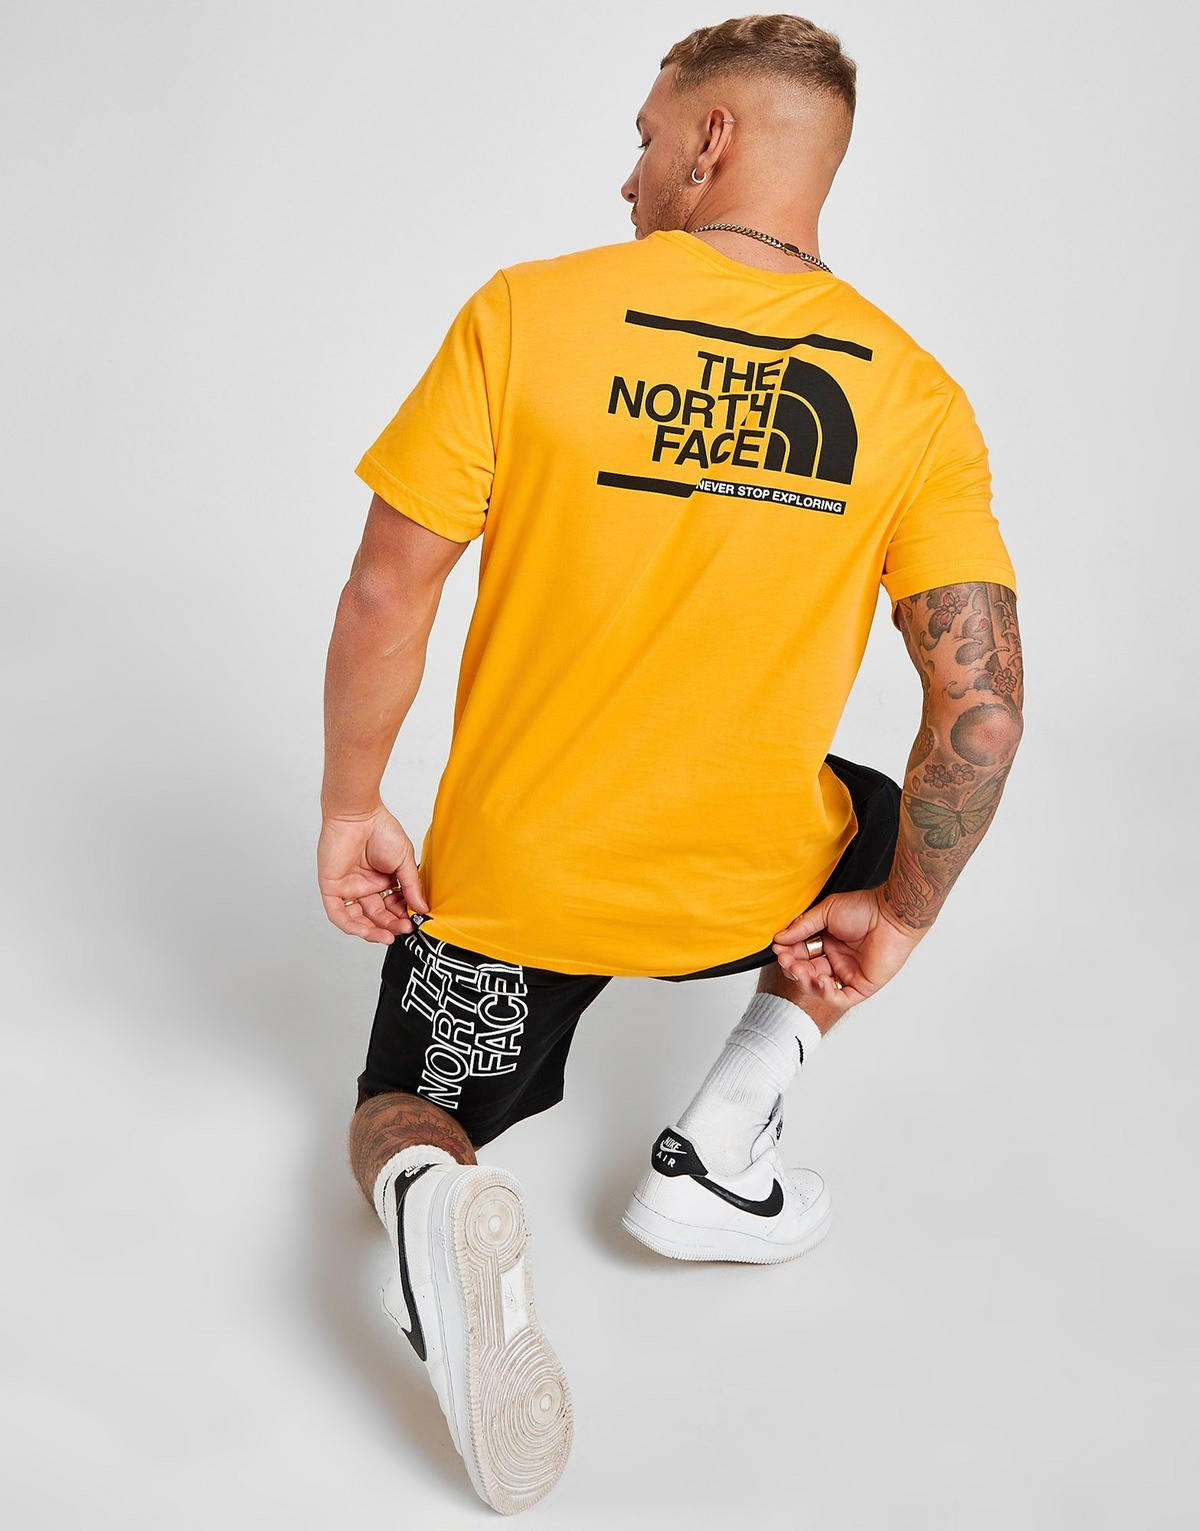 The North Face Two Line Box T-Shirt - Yellow | The Sole Supplier